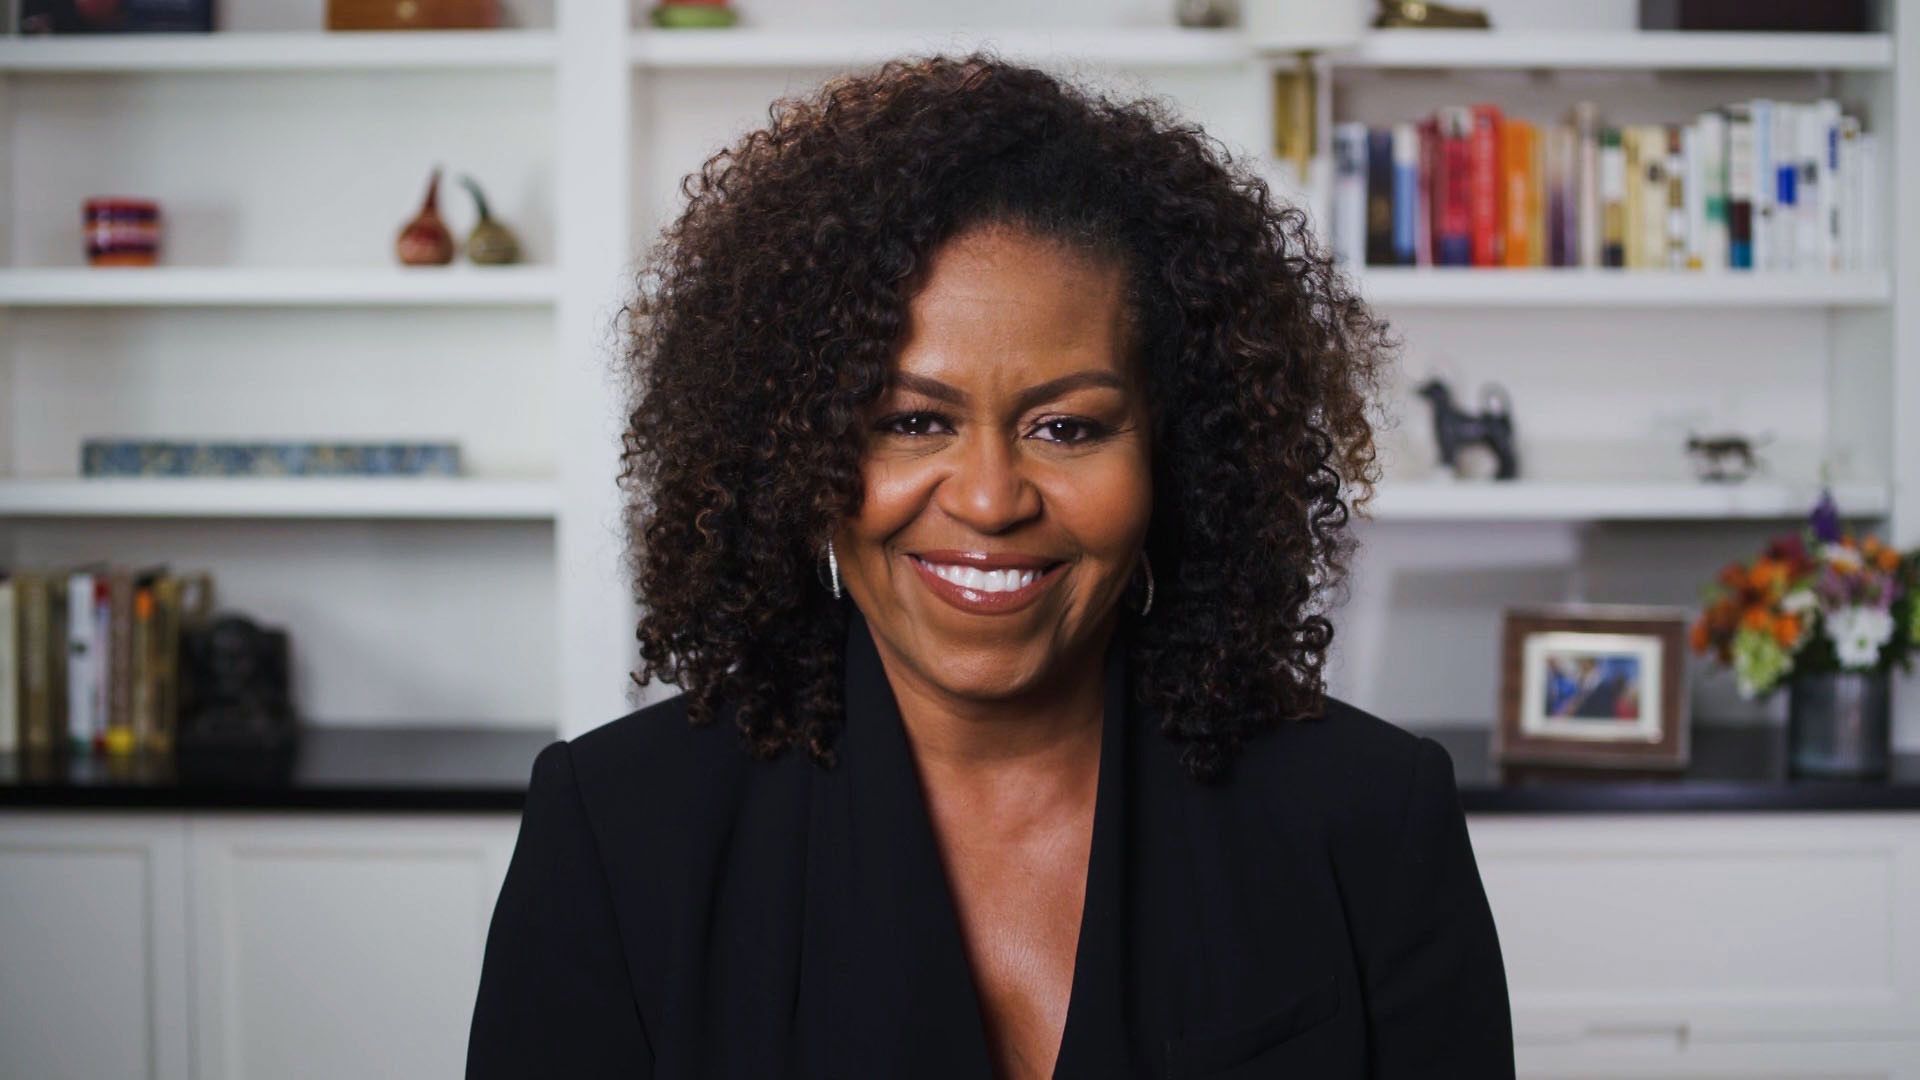 You Could Win a Virtual Hang With Michelle Obama if You Join This Voting Campaign